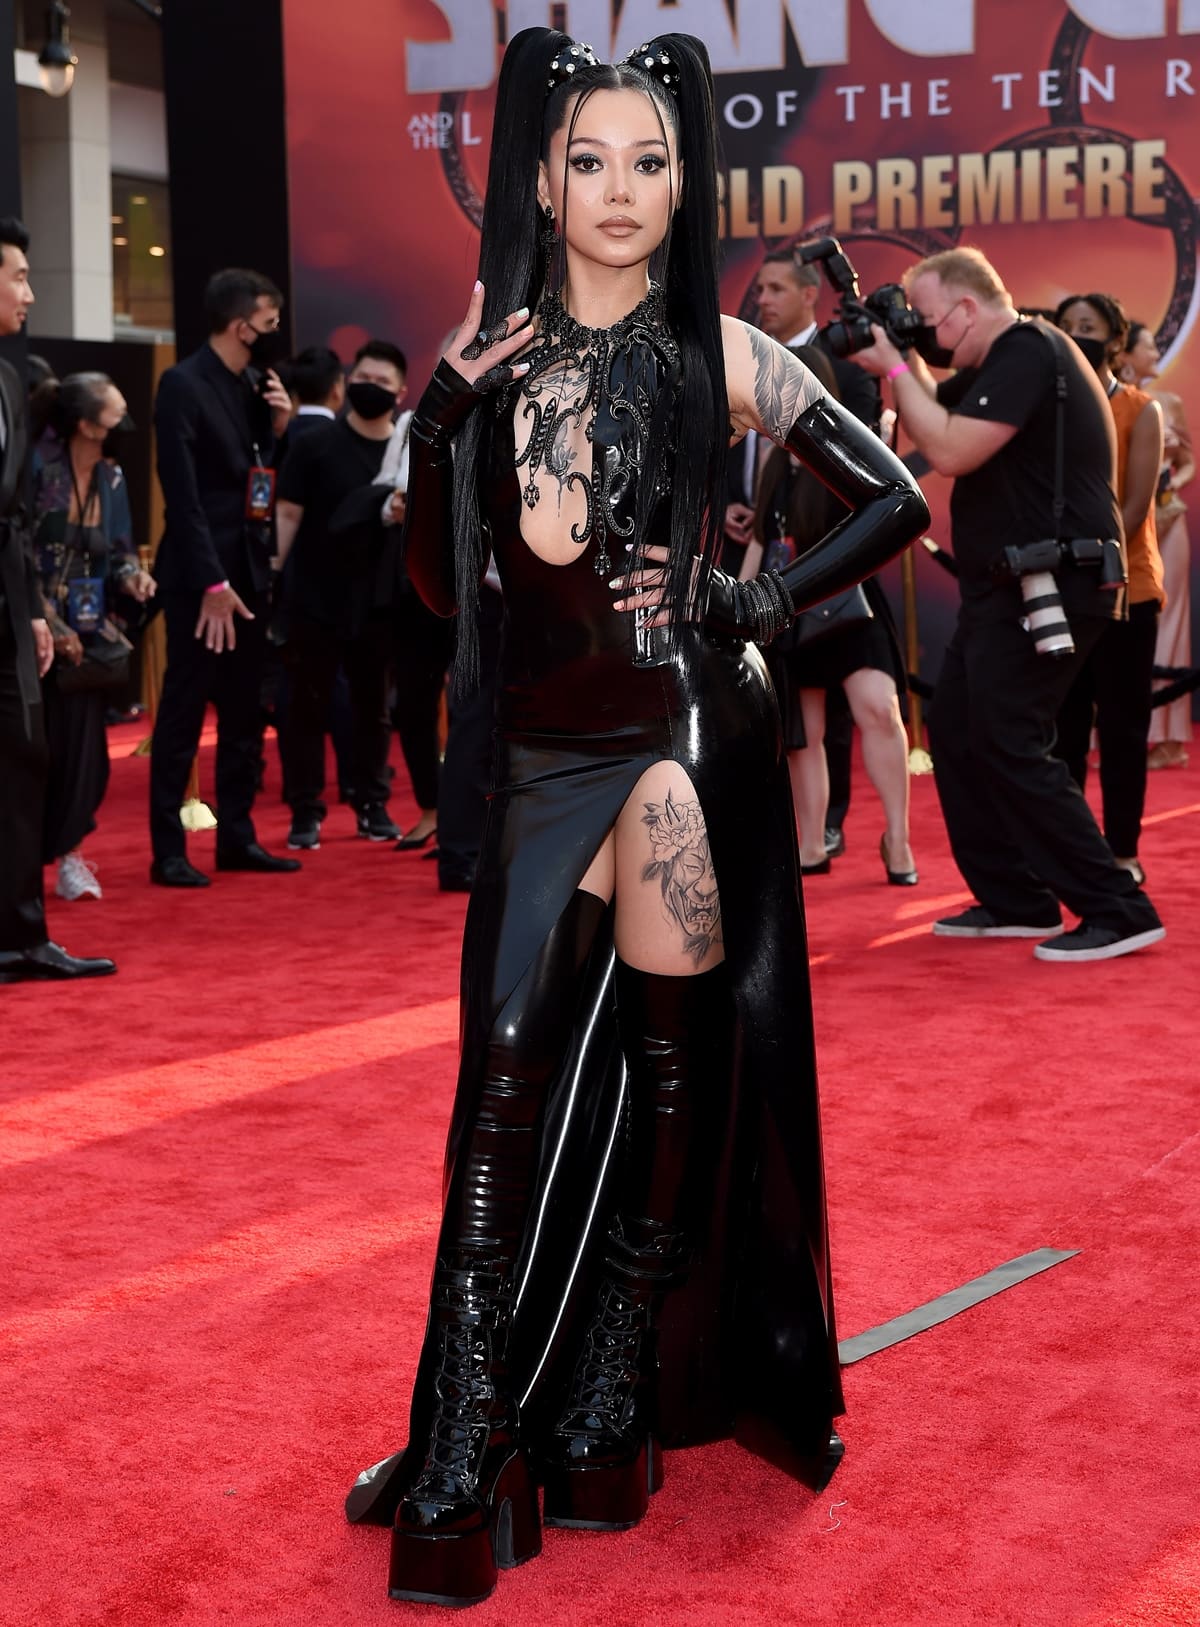 Bella Poarch made her red carpet debut at the 'Shang-Chi and the Legend of the Ten Rings' World Premiere